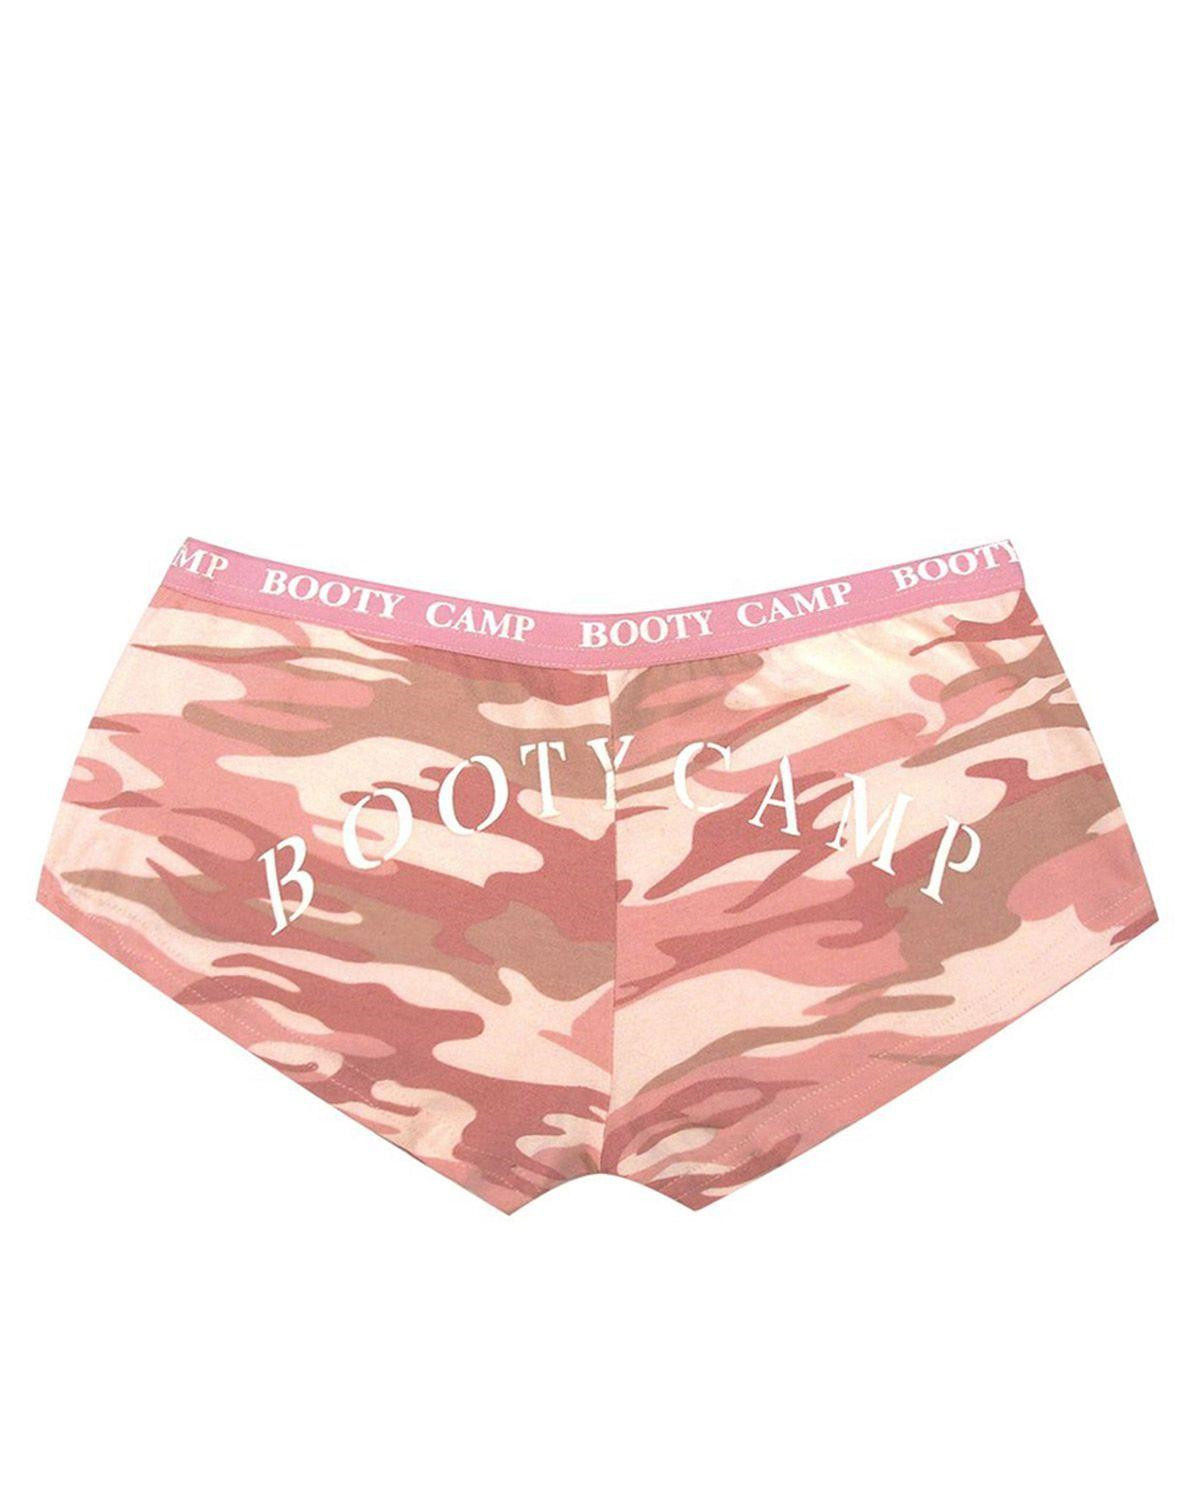 Rothco Trusser - 'Booty Camp' (Pink Camo, M)